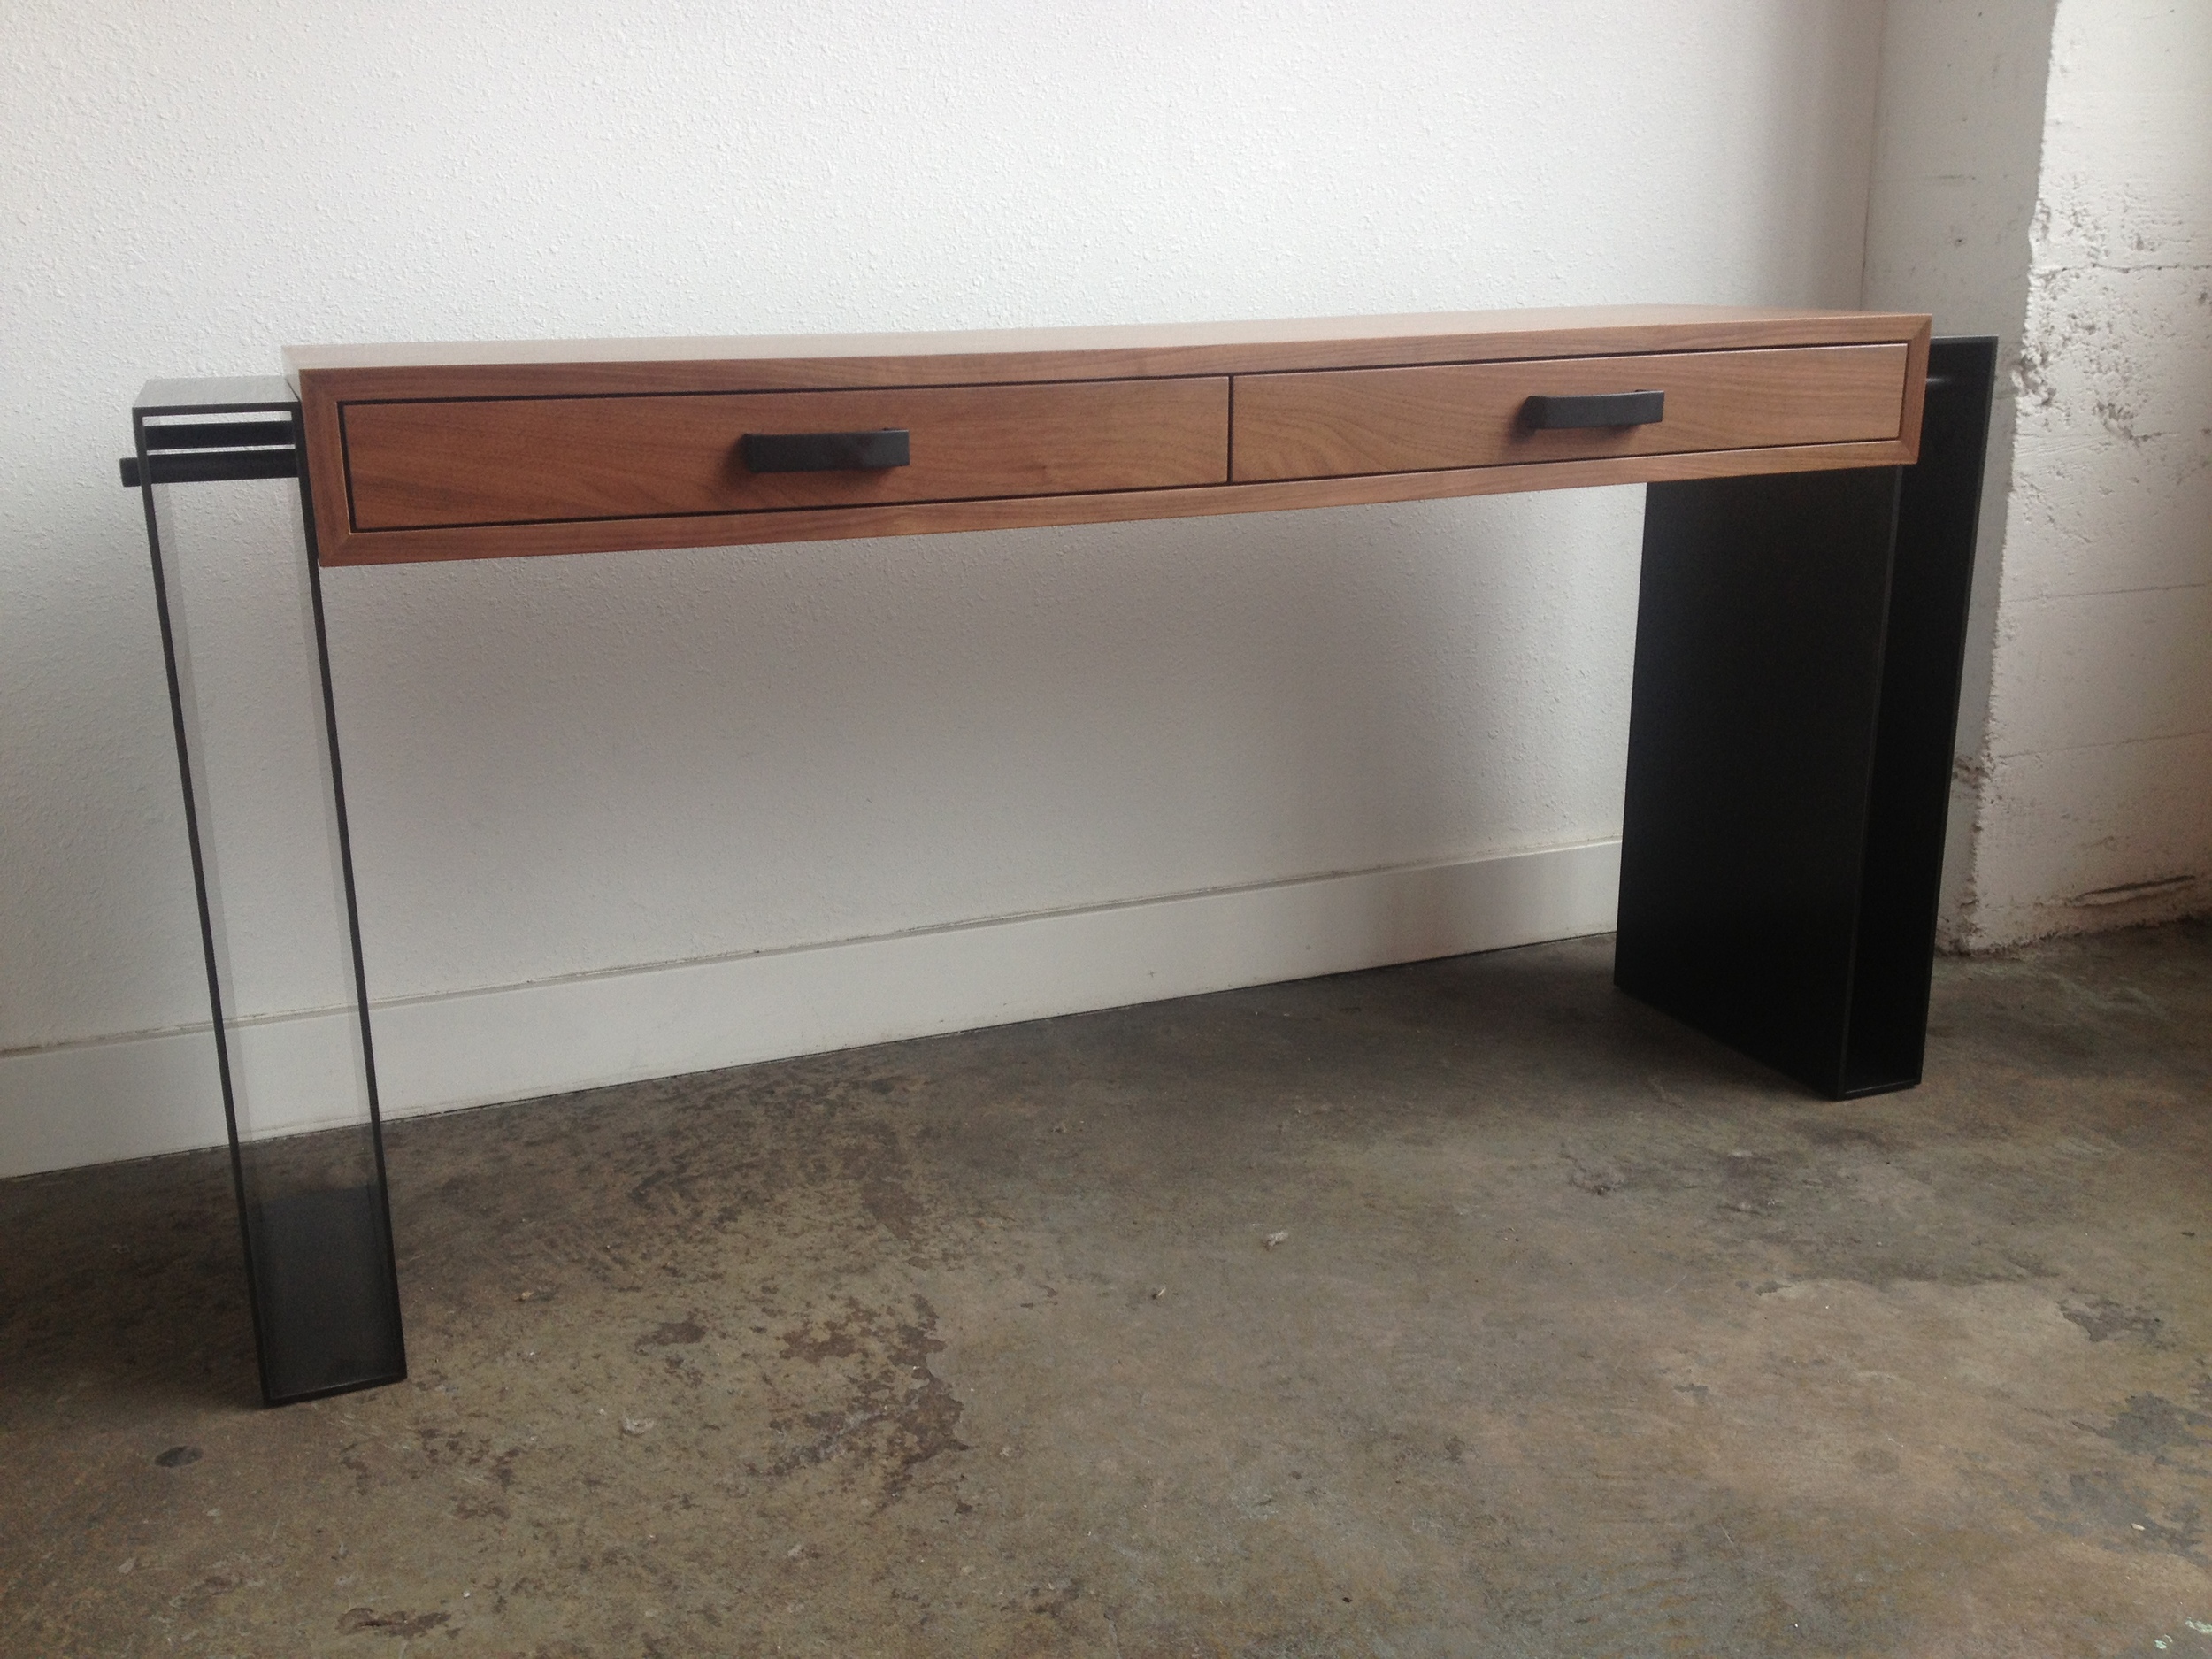  Hot Rolled Steel legs that's bolted into a Walnut Cabinet.  Designed by Hensel Design Studios 